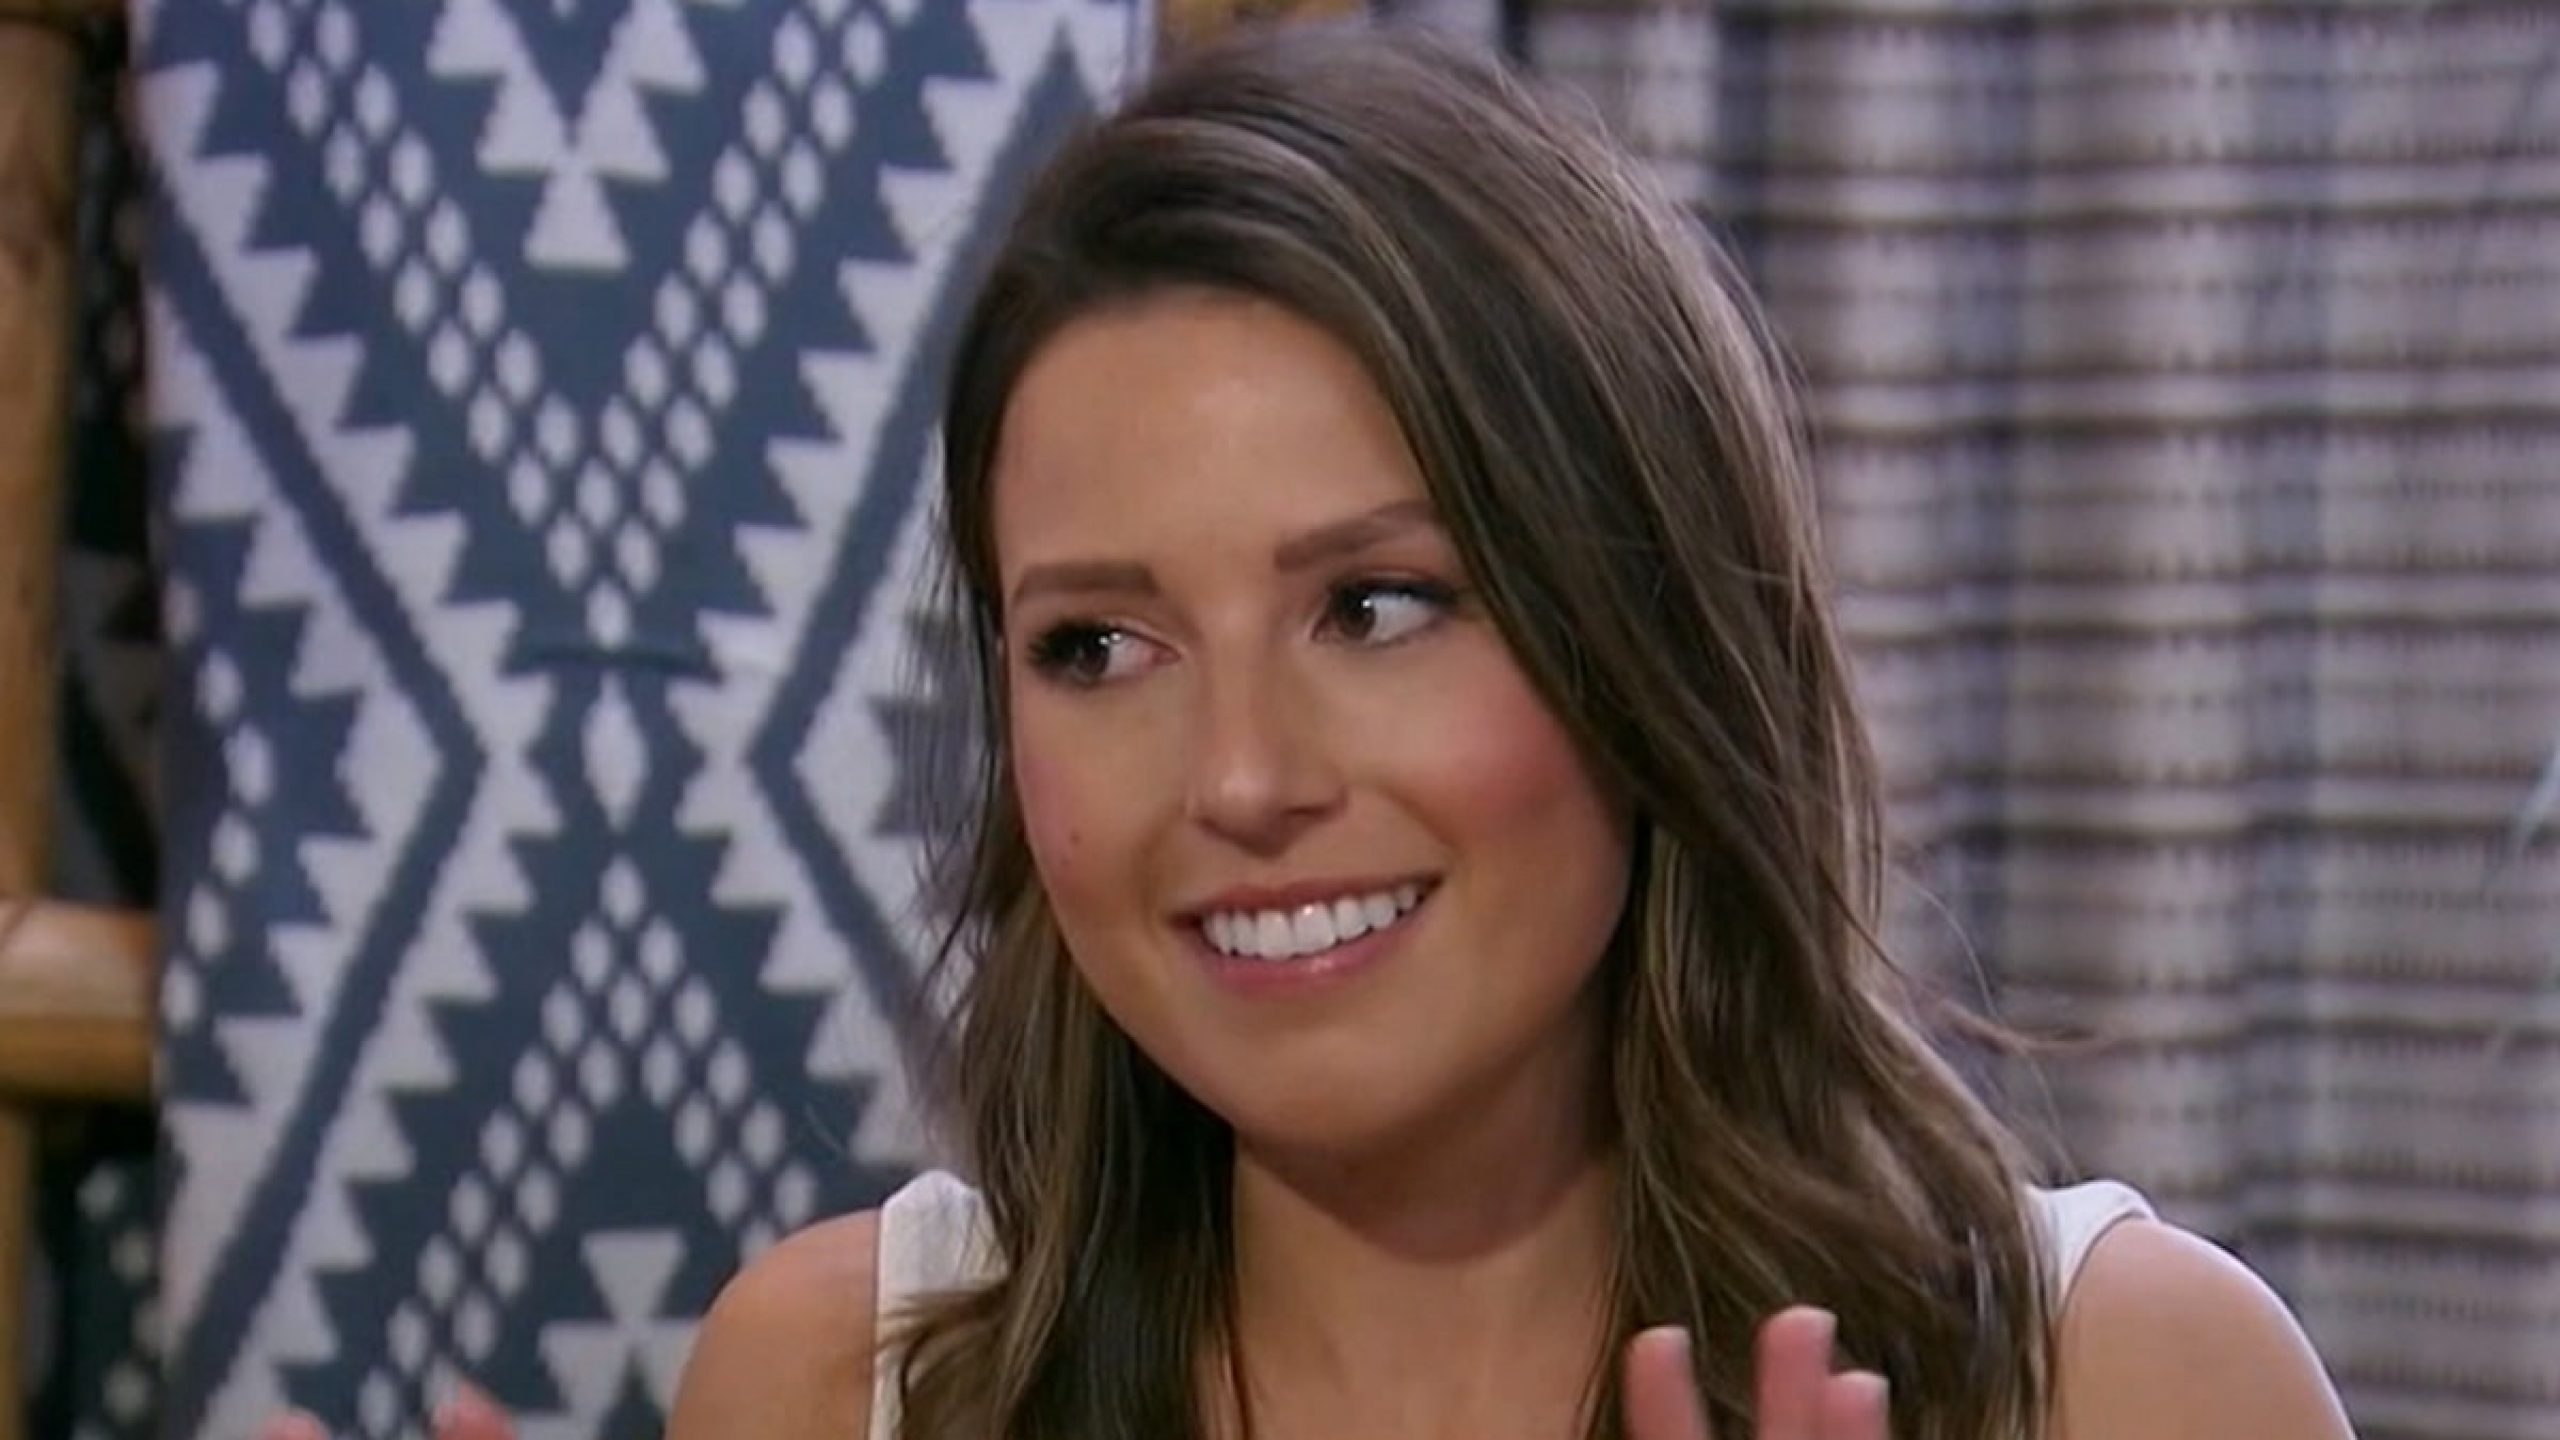 ‘The Bachelorette’ Takes on Masturbation with WOWO Challenge